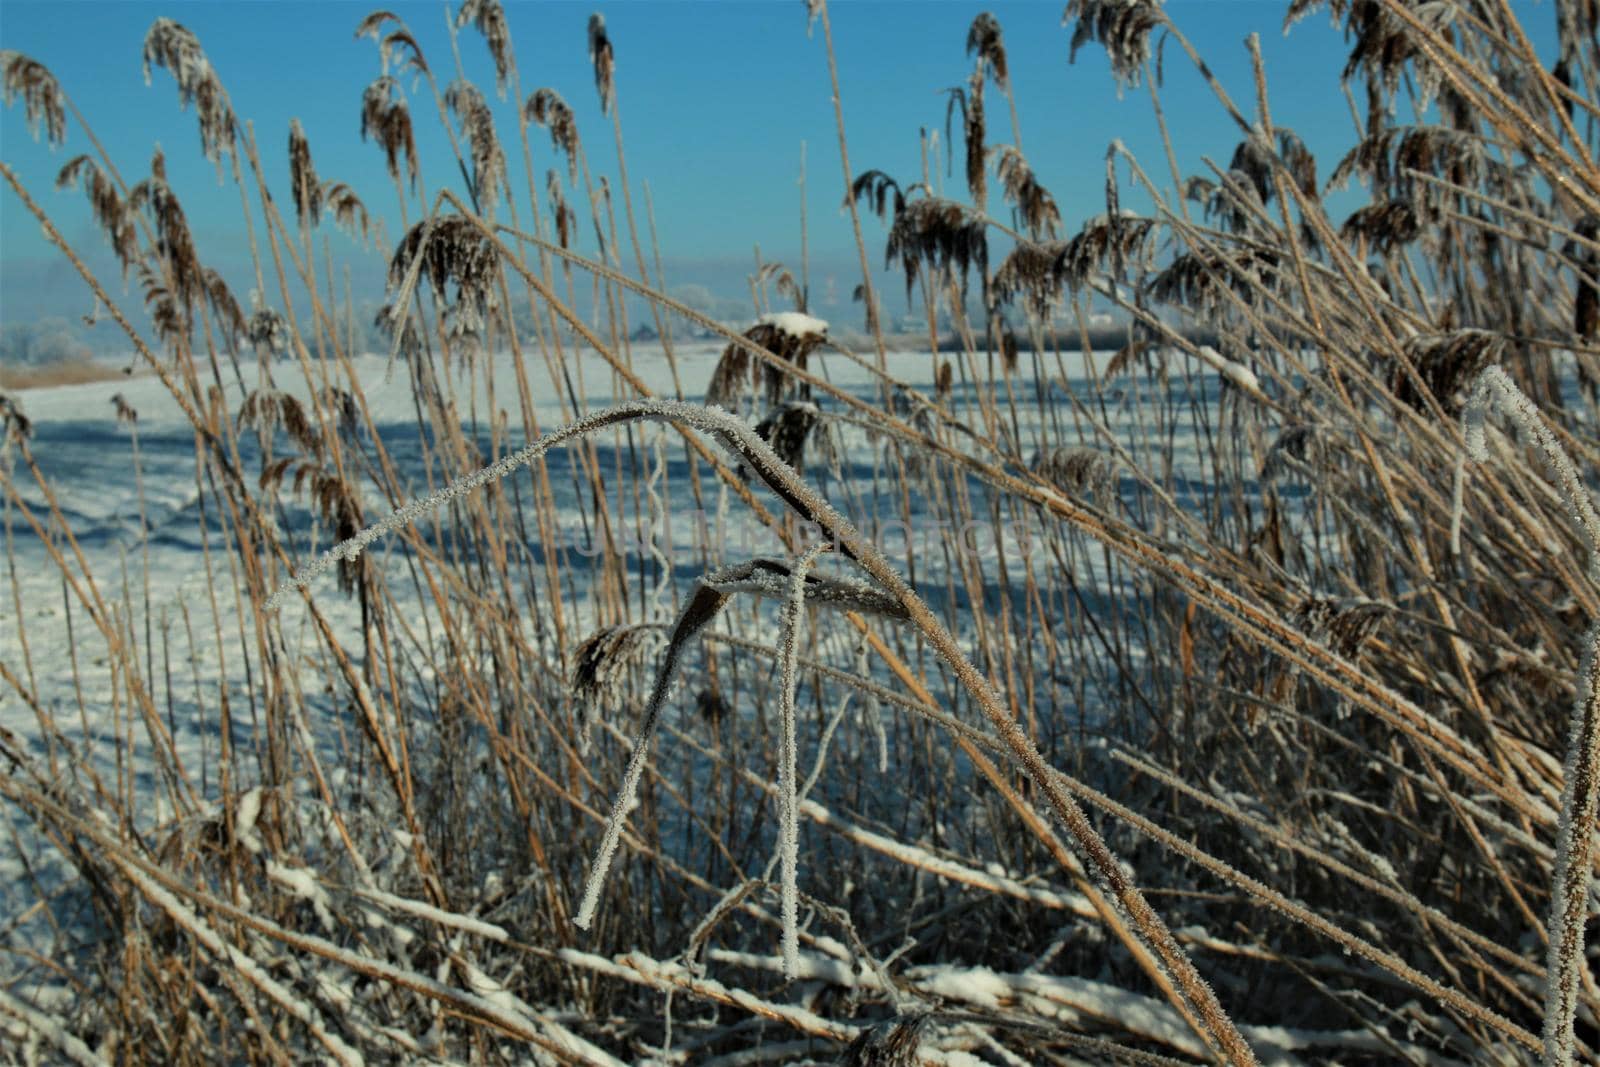 Iced reeds in front of a rural winter landscape